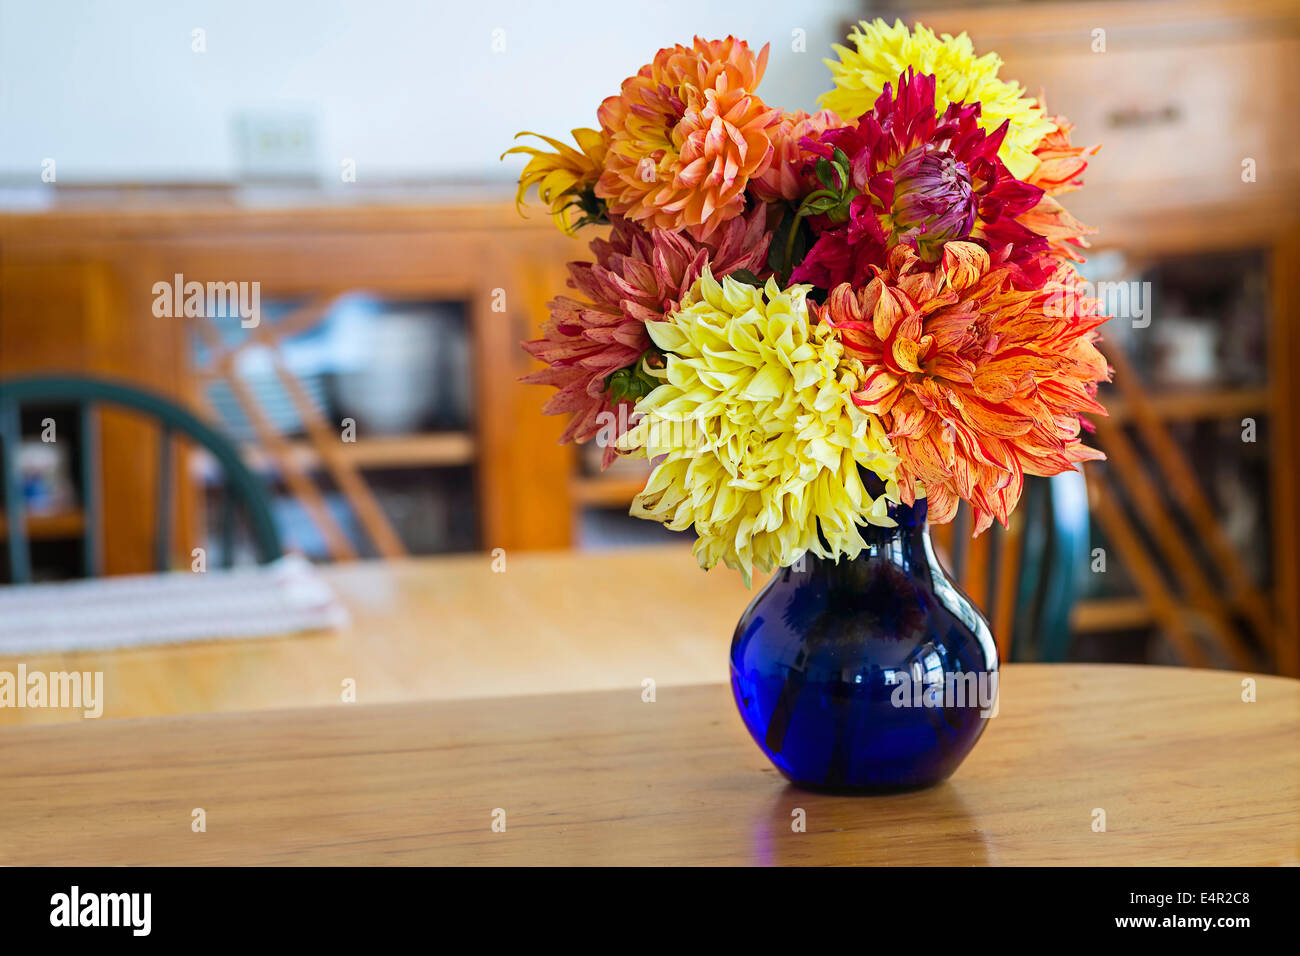 Home style fall bouquet with garden flowers. Stock Photo